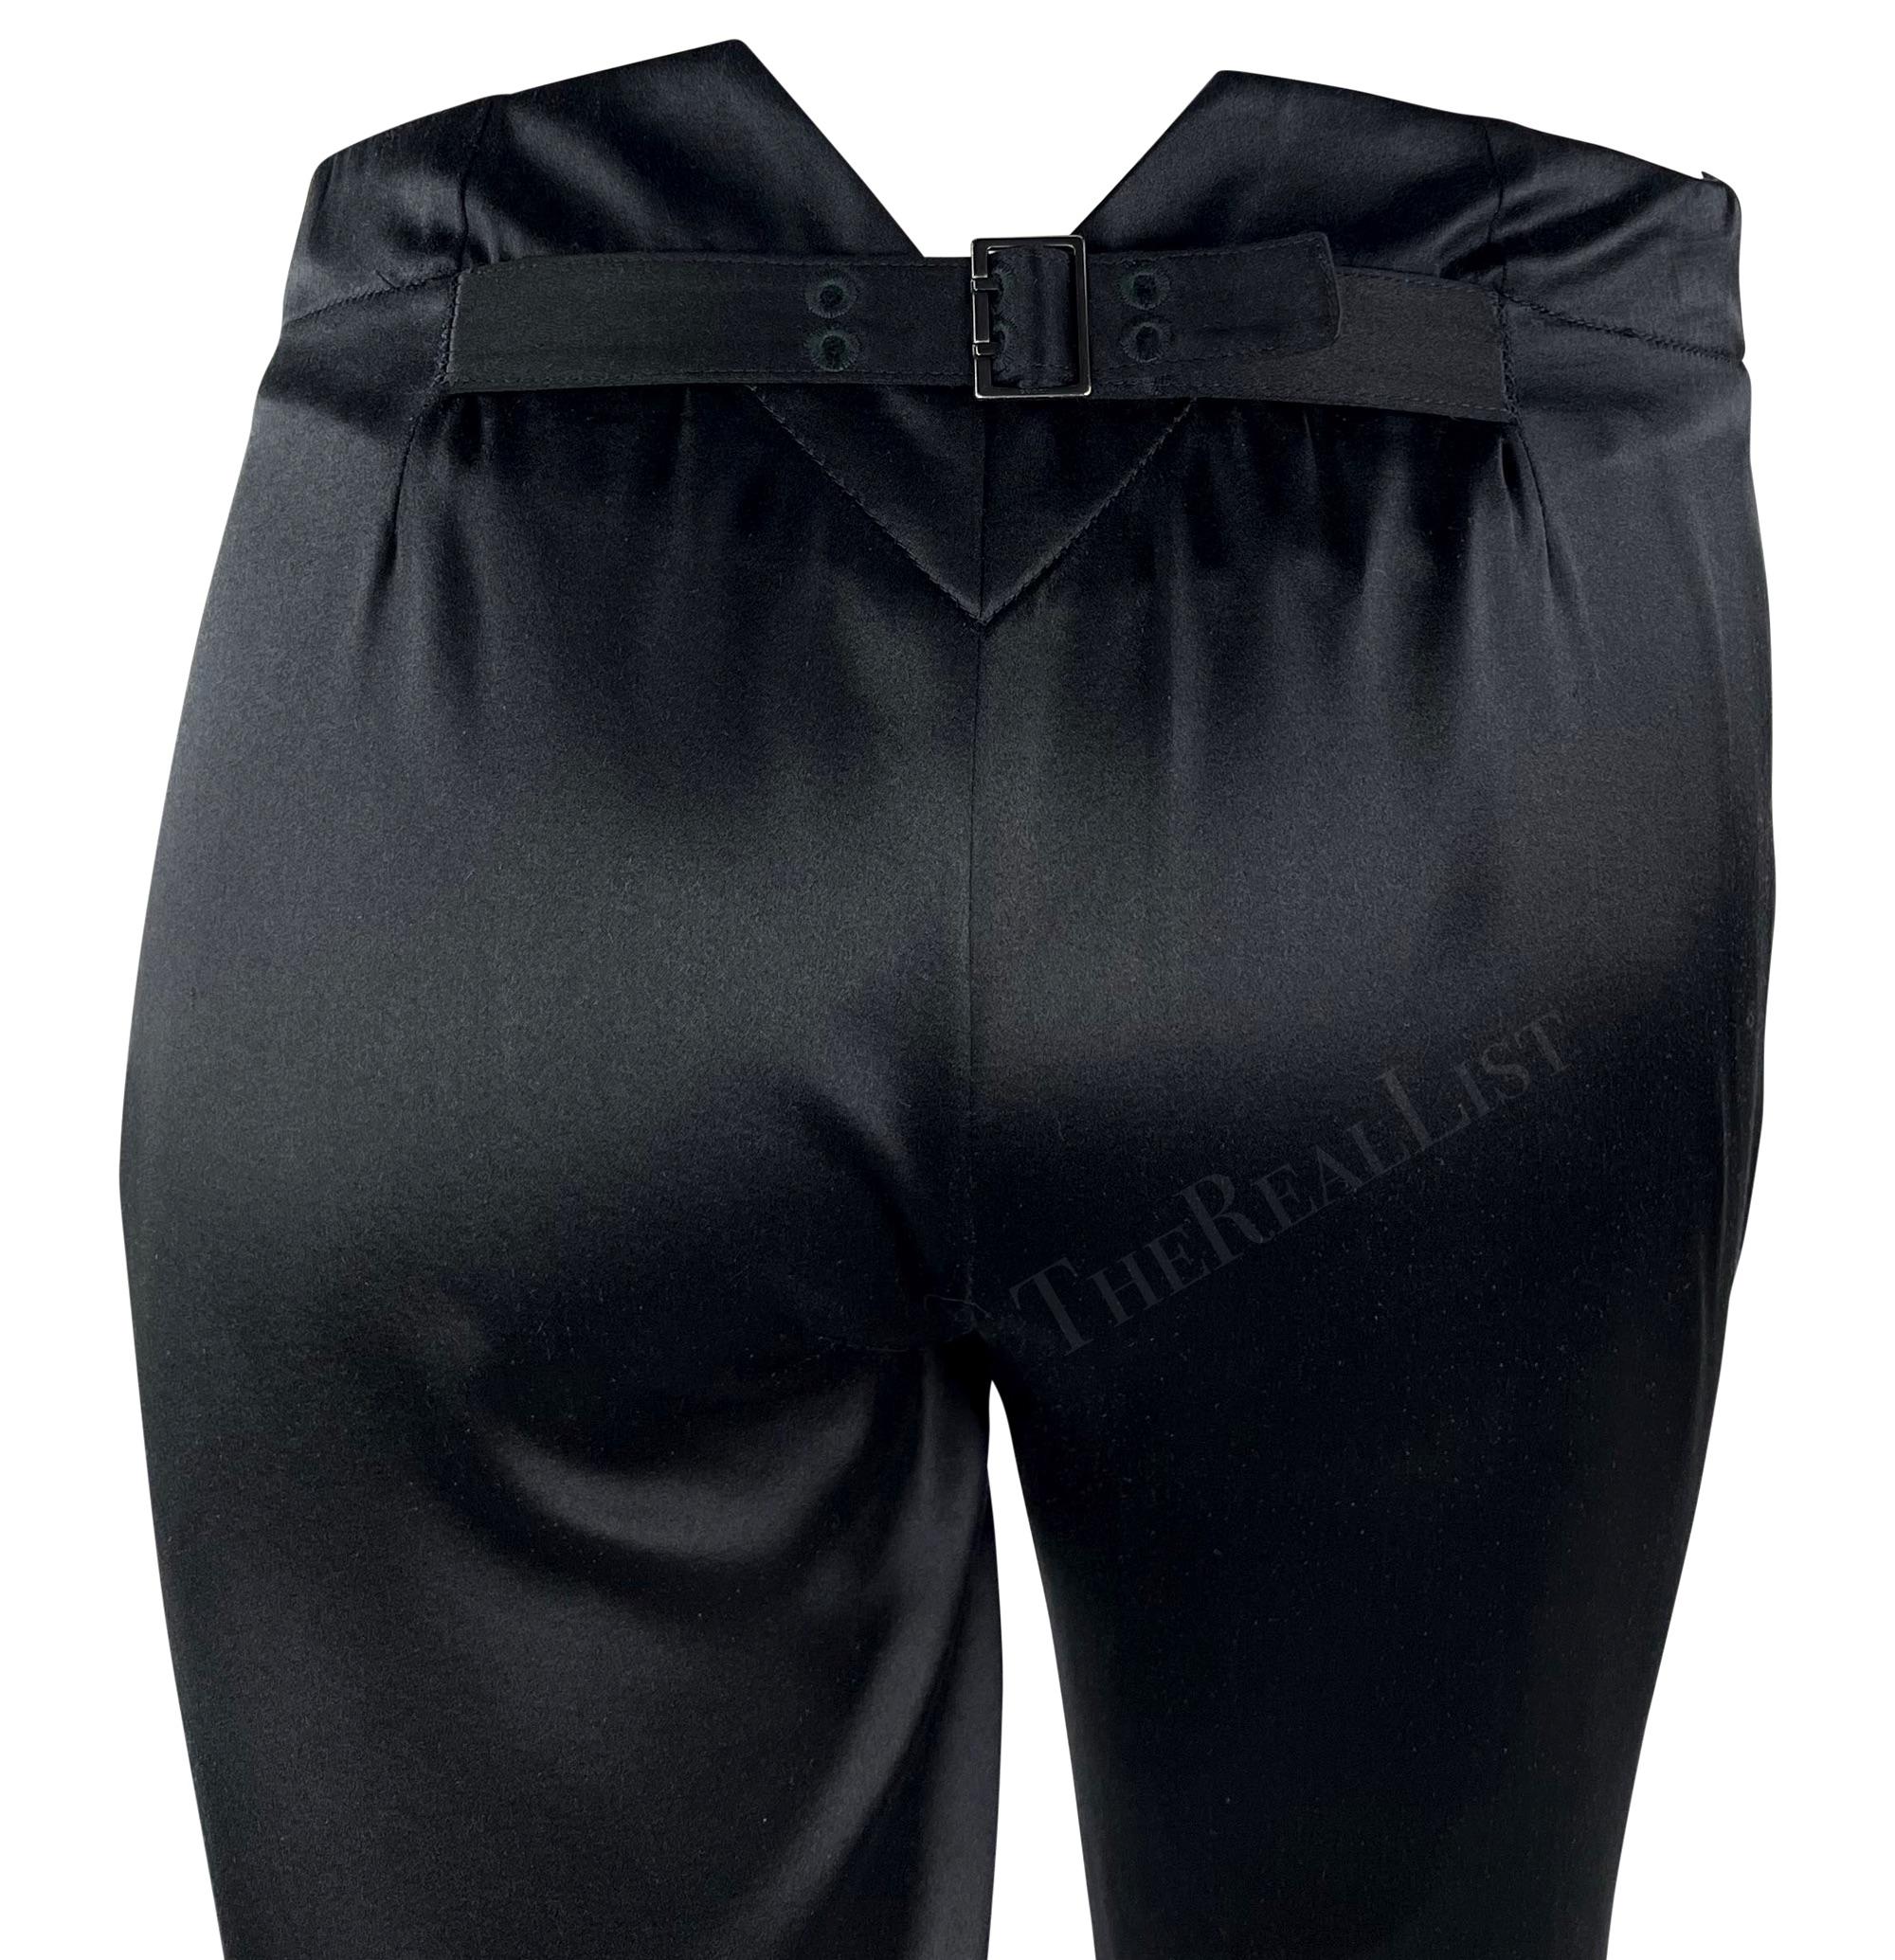 These black silk pants are designed by Tom Ford for Gucci, from the Fall/Winter 2002 collection. Made from luxurious satin, they are tapered with a distinctive v-shaped cut at the back, where you'll find an adjustable buckle for a perfect